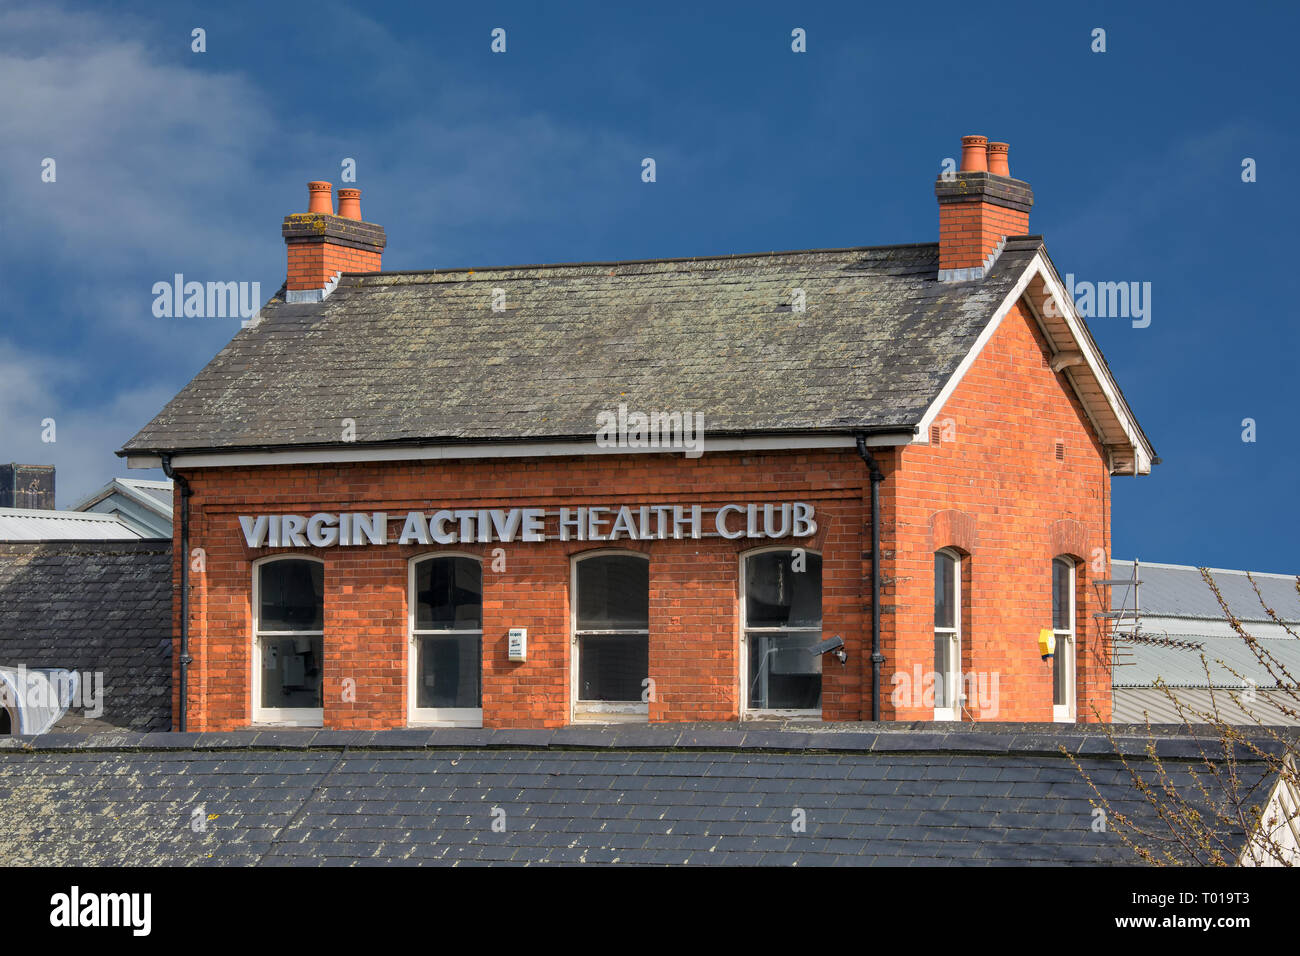 Exterior Of A Virgin Active Health Club in Nottingham Stock Photo